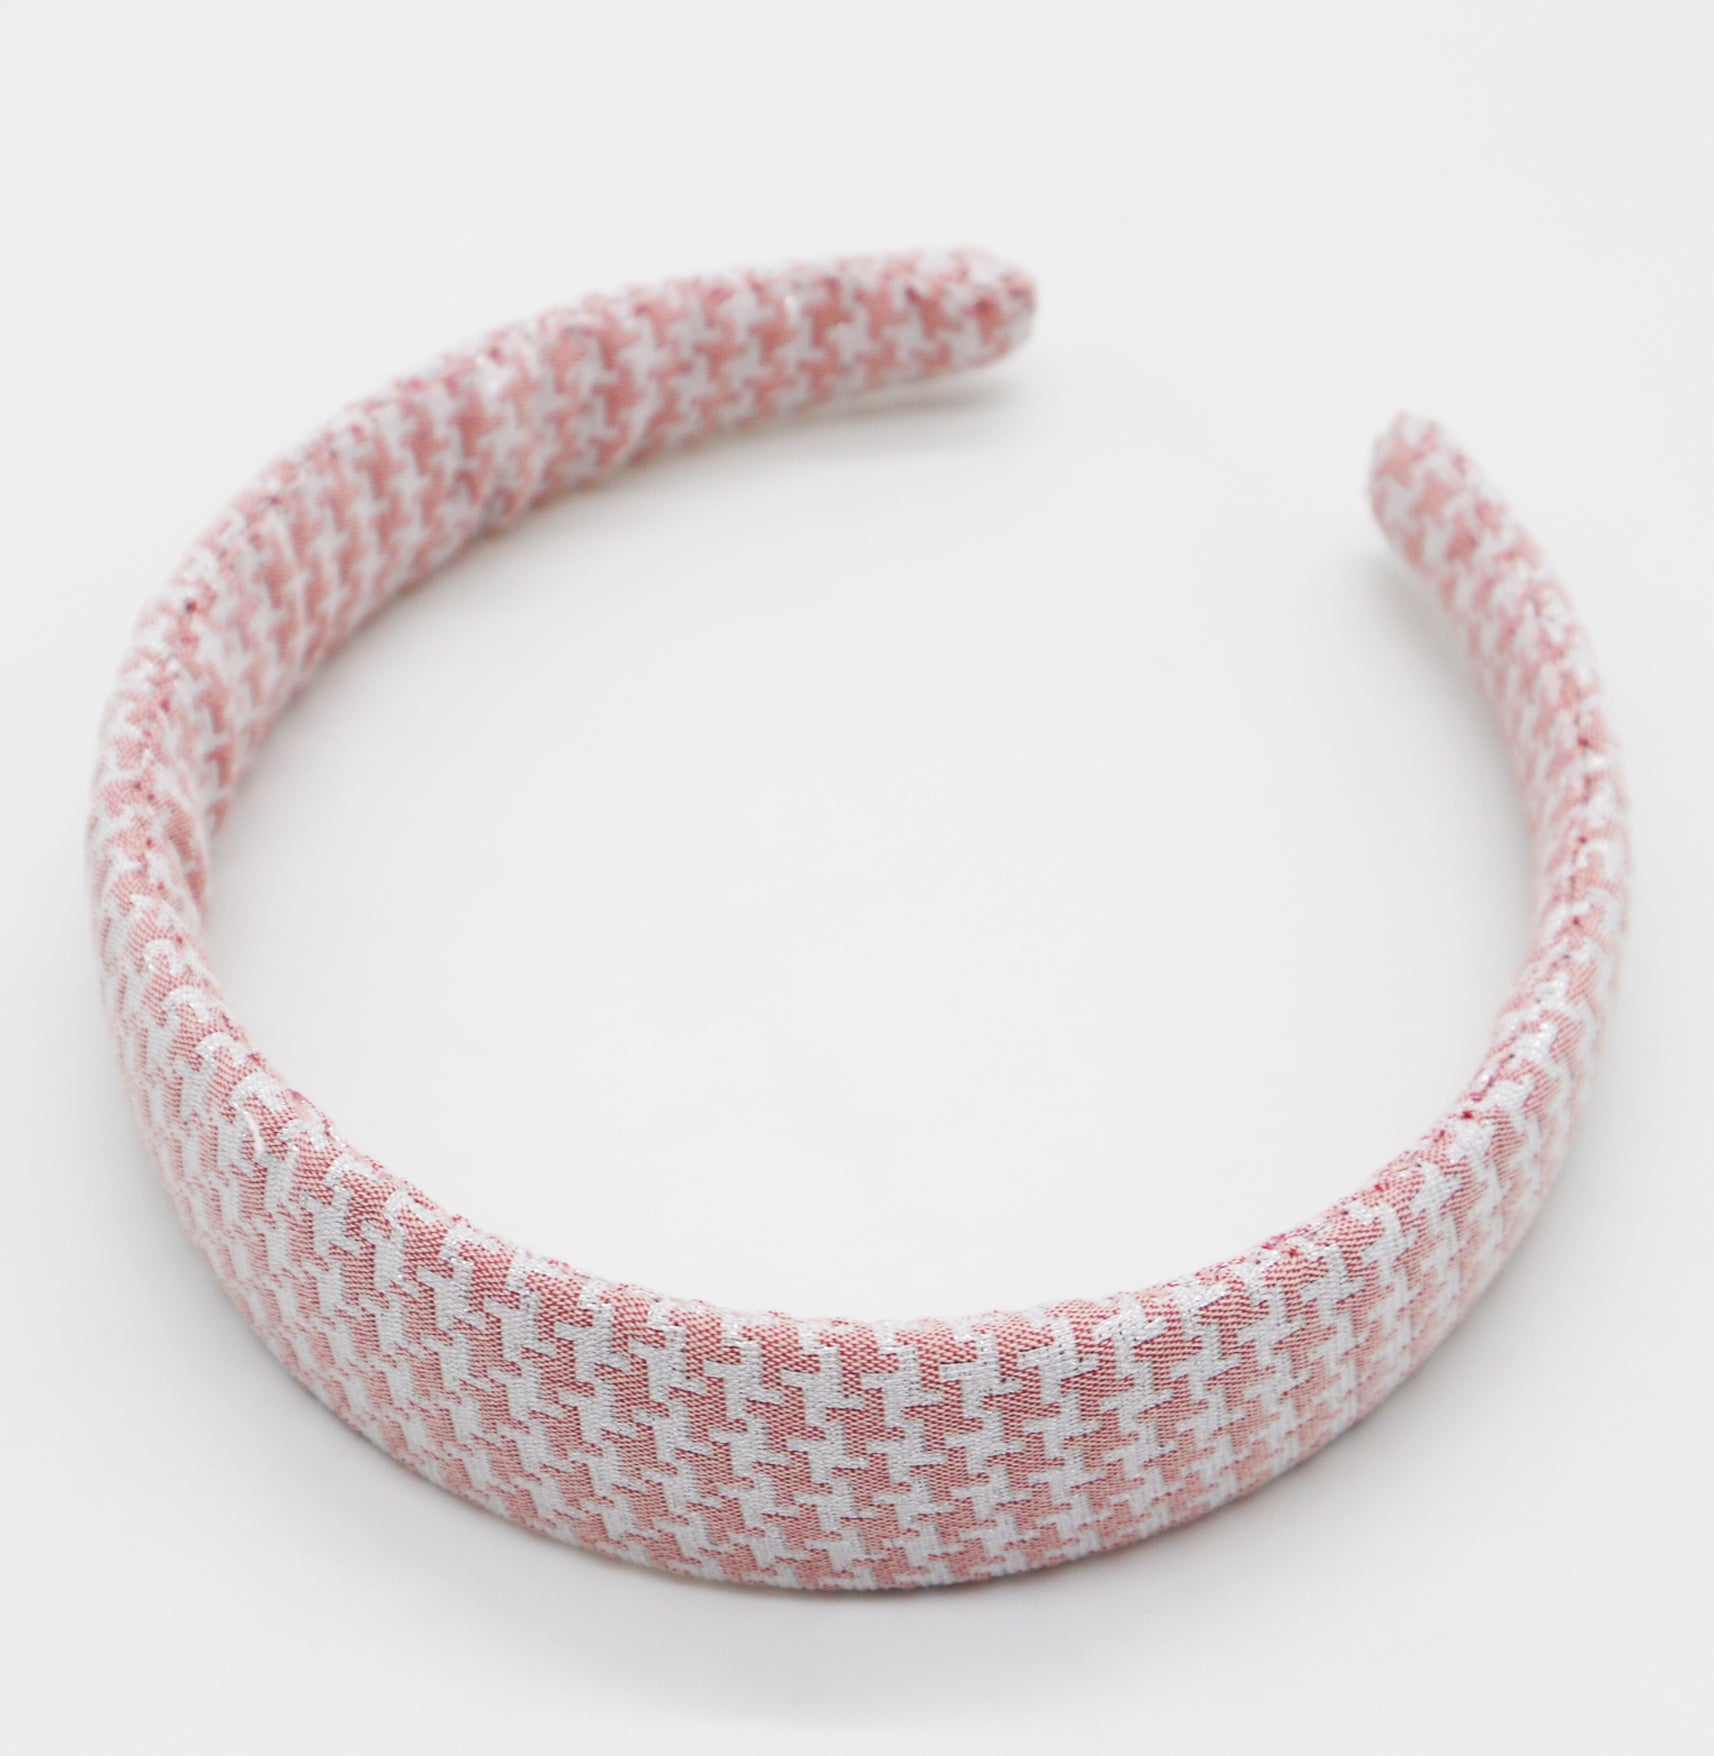 The Popping Candy pink headband